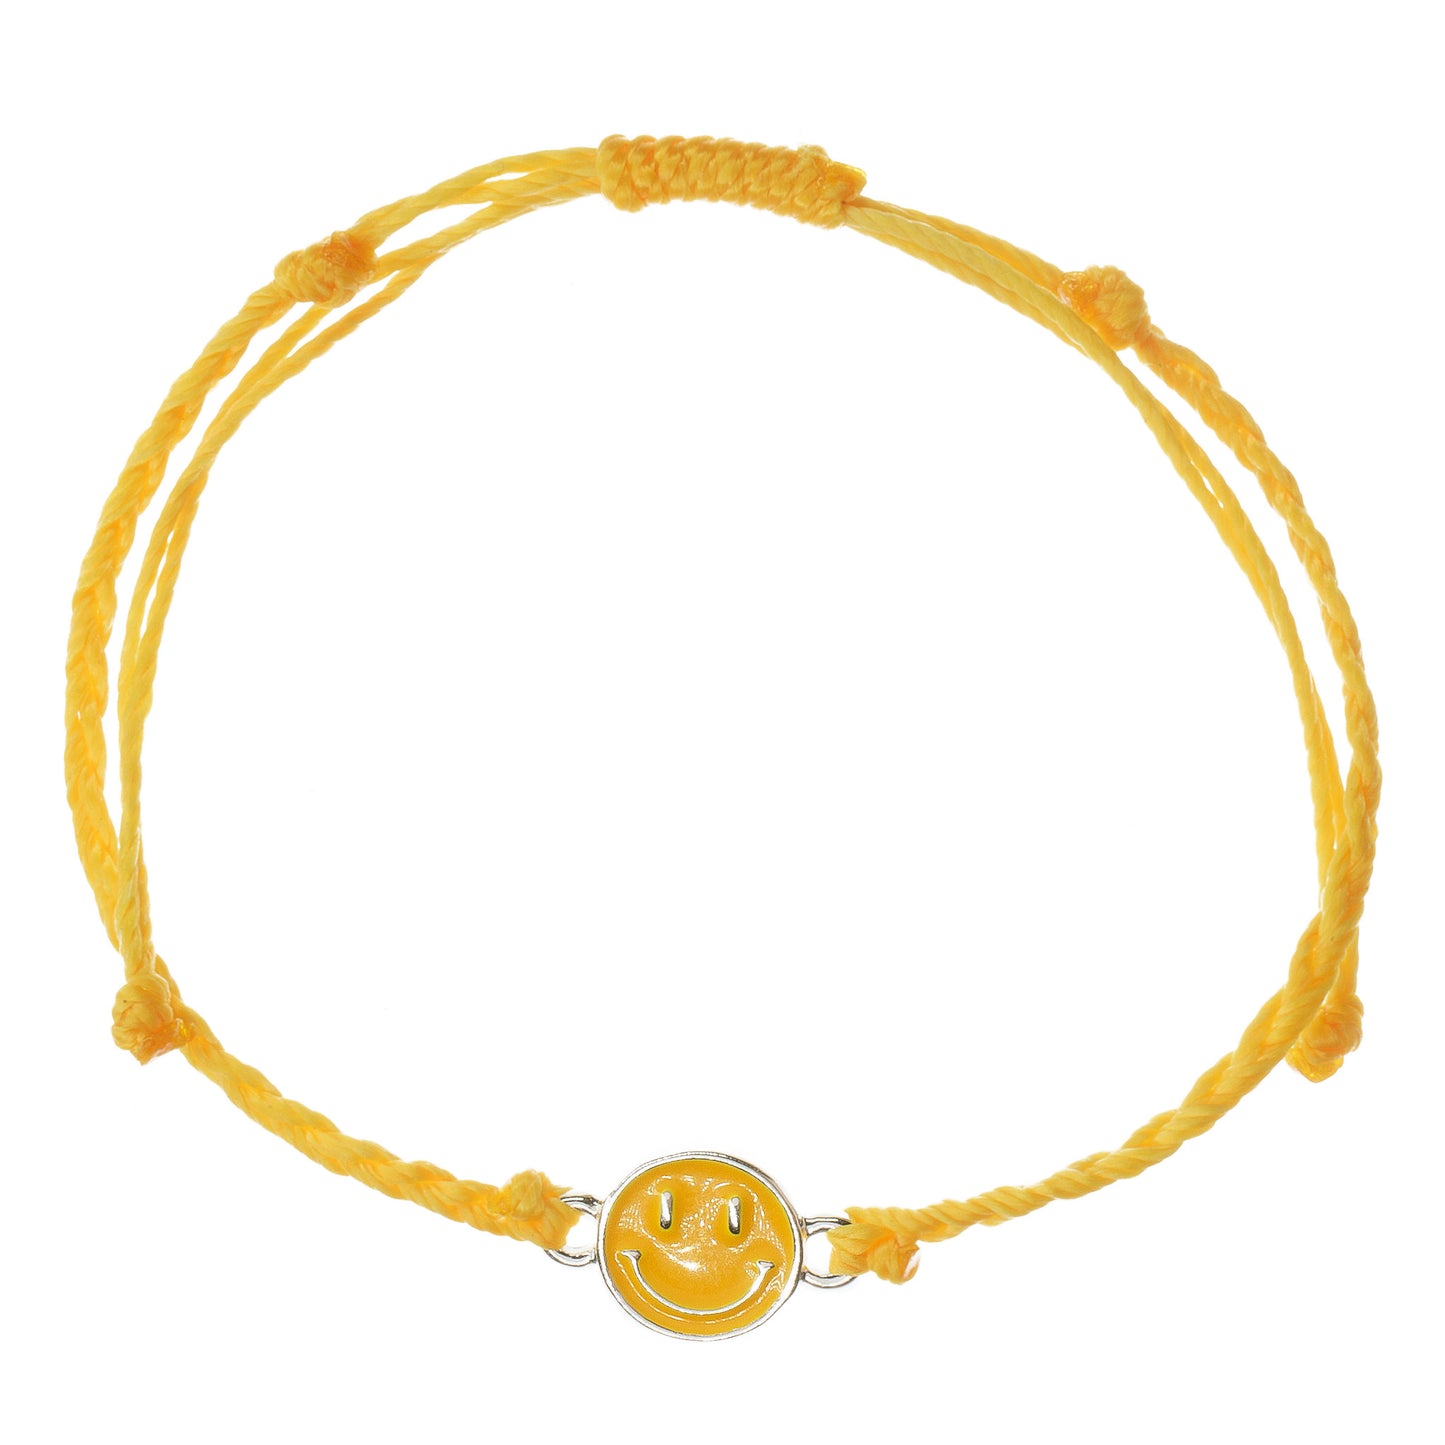 yellow smiley face charm string bracelet